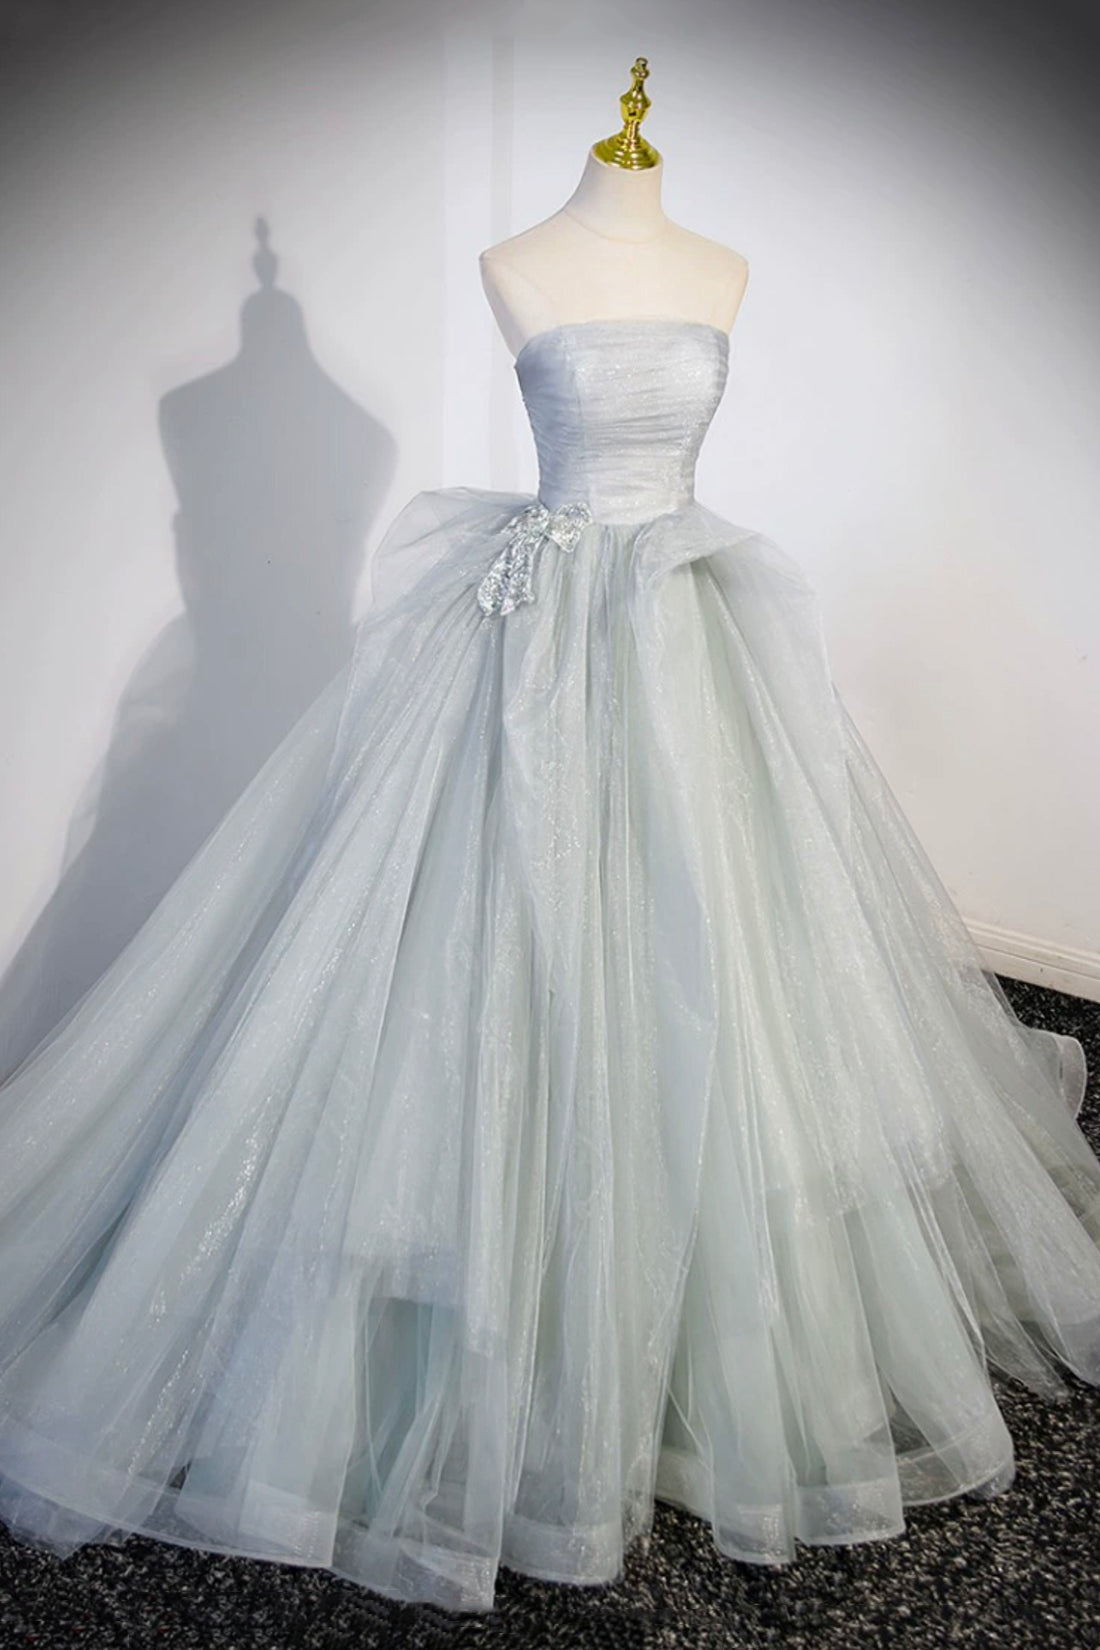 Prom Dresses Ballgown, Gray Strapless Long Formal Dress, Gray Tulle Evening Dress Party Dress